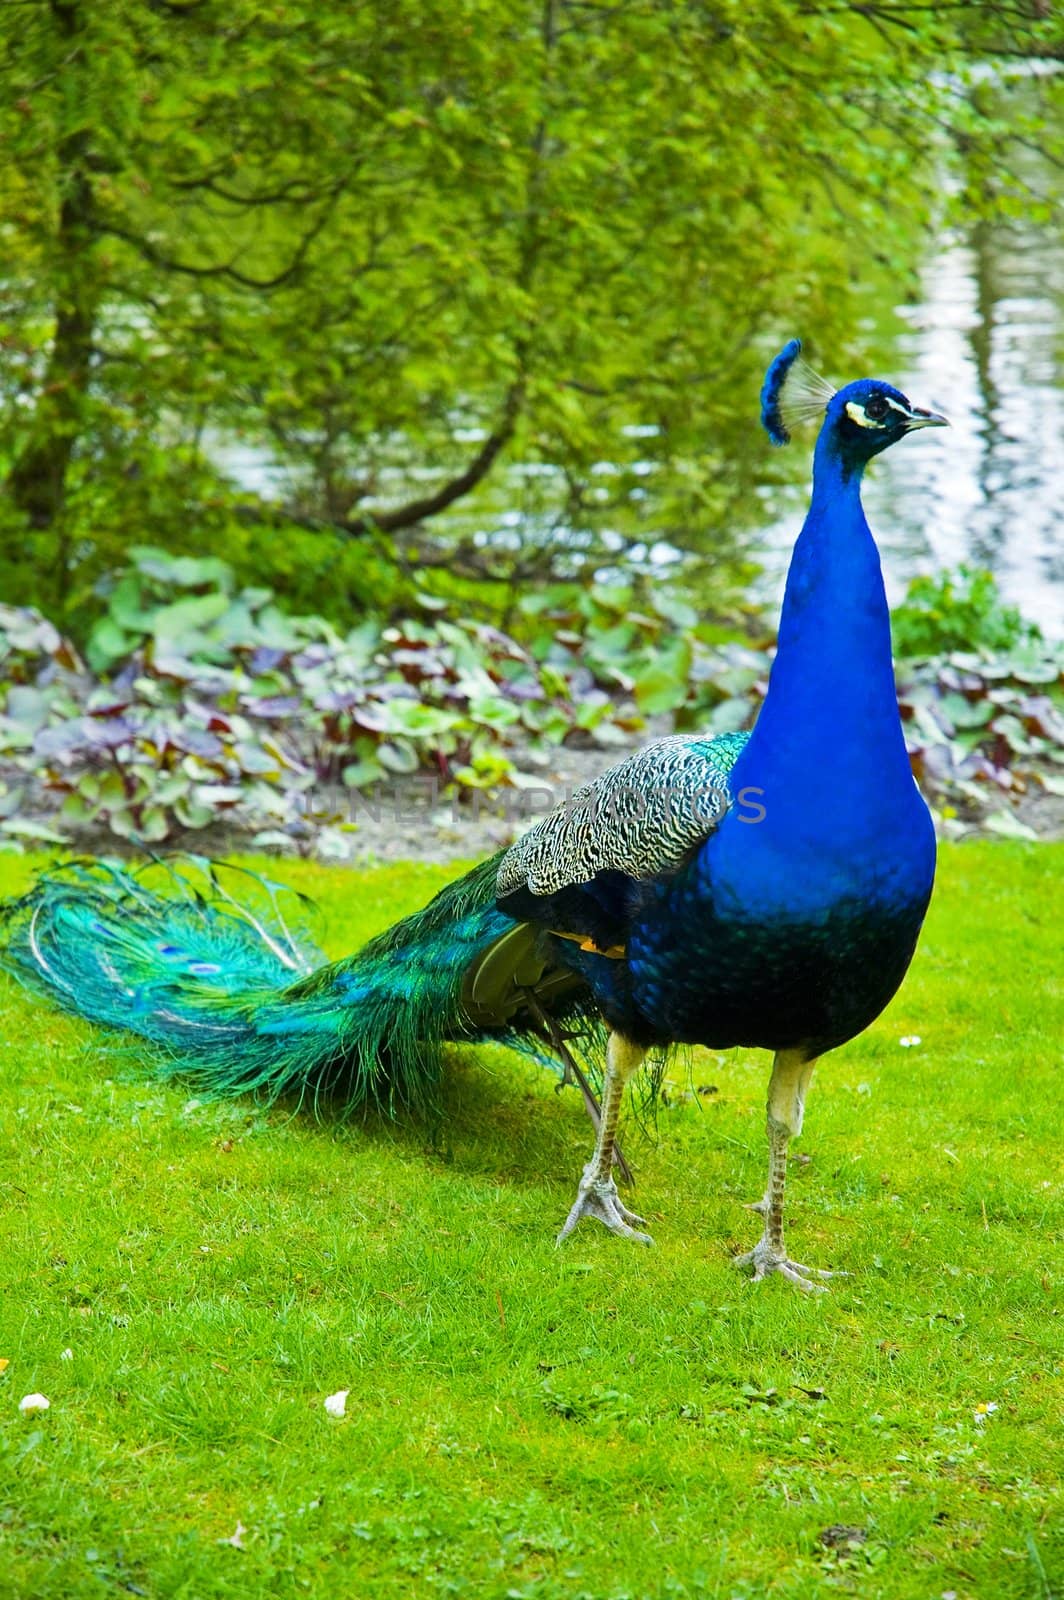 Peacock walks about park in Warsaw